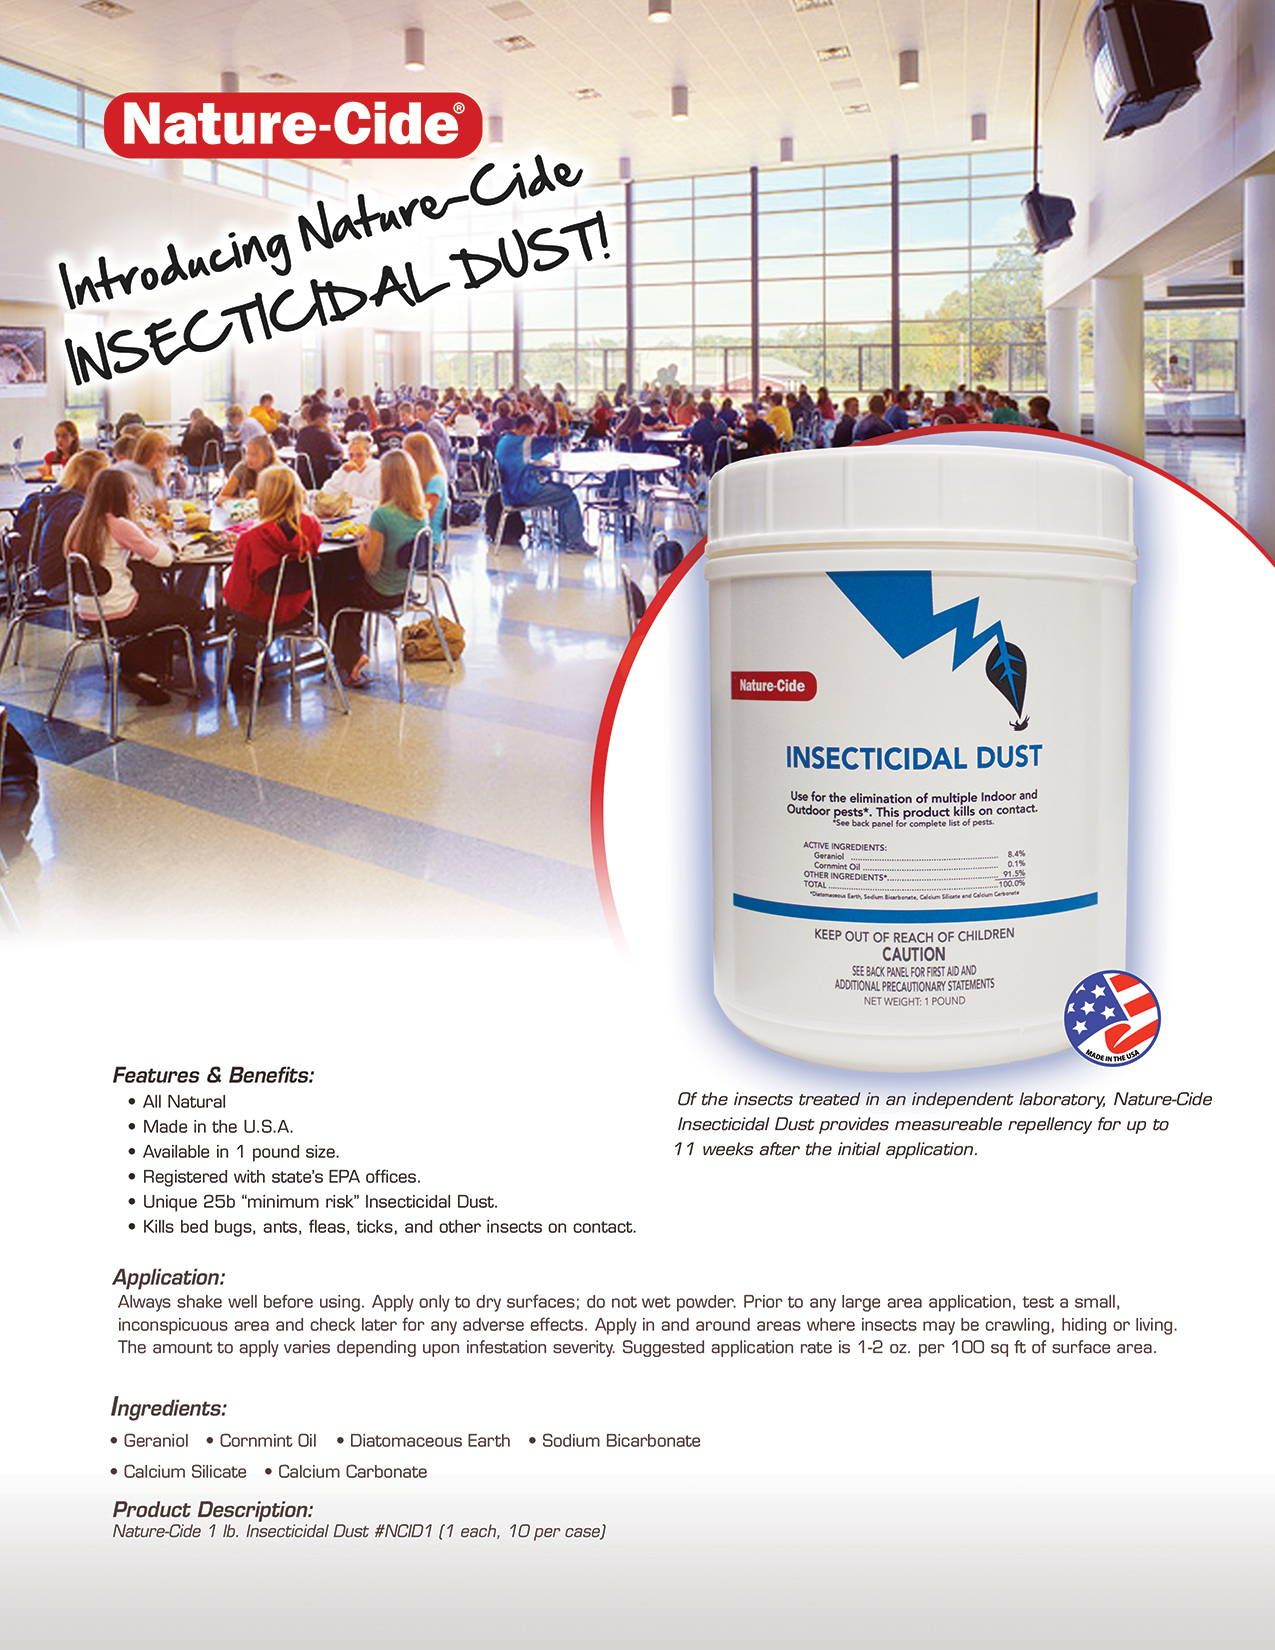 Nature-Cide Insecticidal Dust Product Info